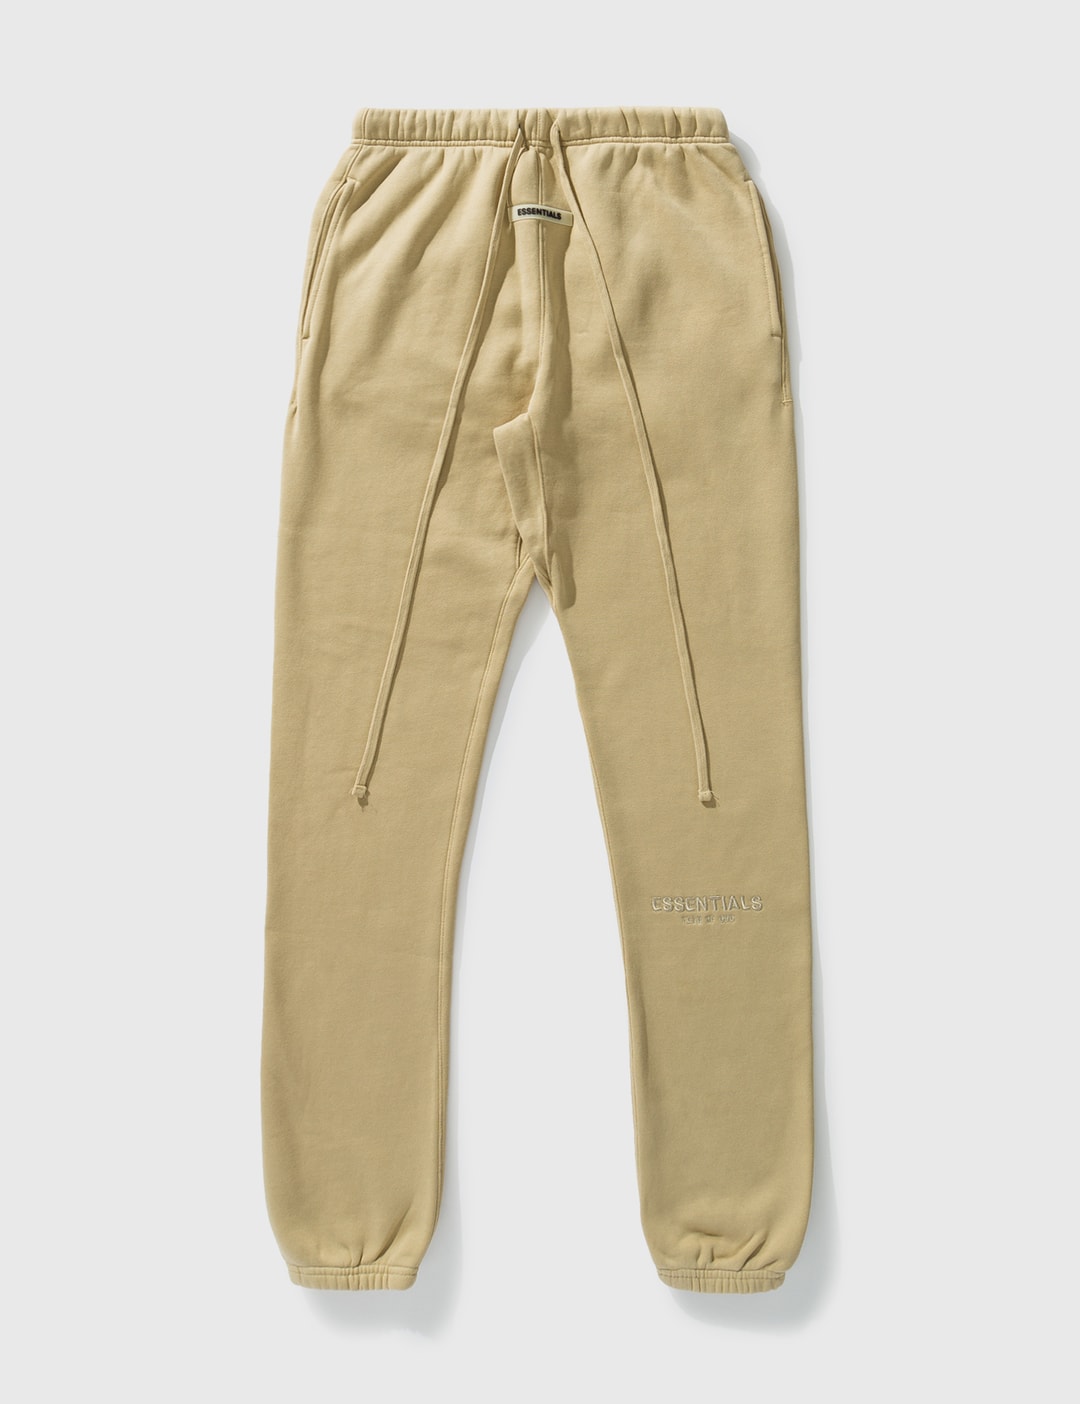 Fear of God Essentials - FEAR OF GOD ESSENTIALS SWEATPANTS  HBX - Globally  Curated Fashion and Lifestyle by Hypebeast